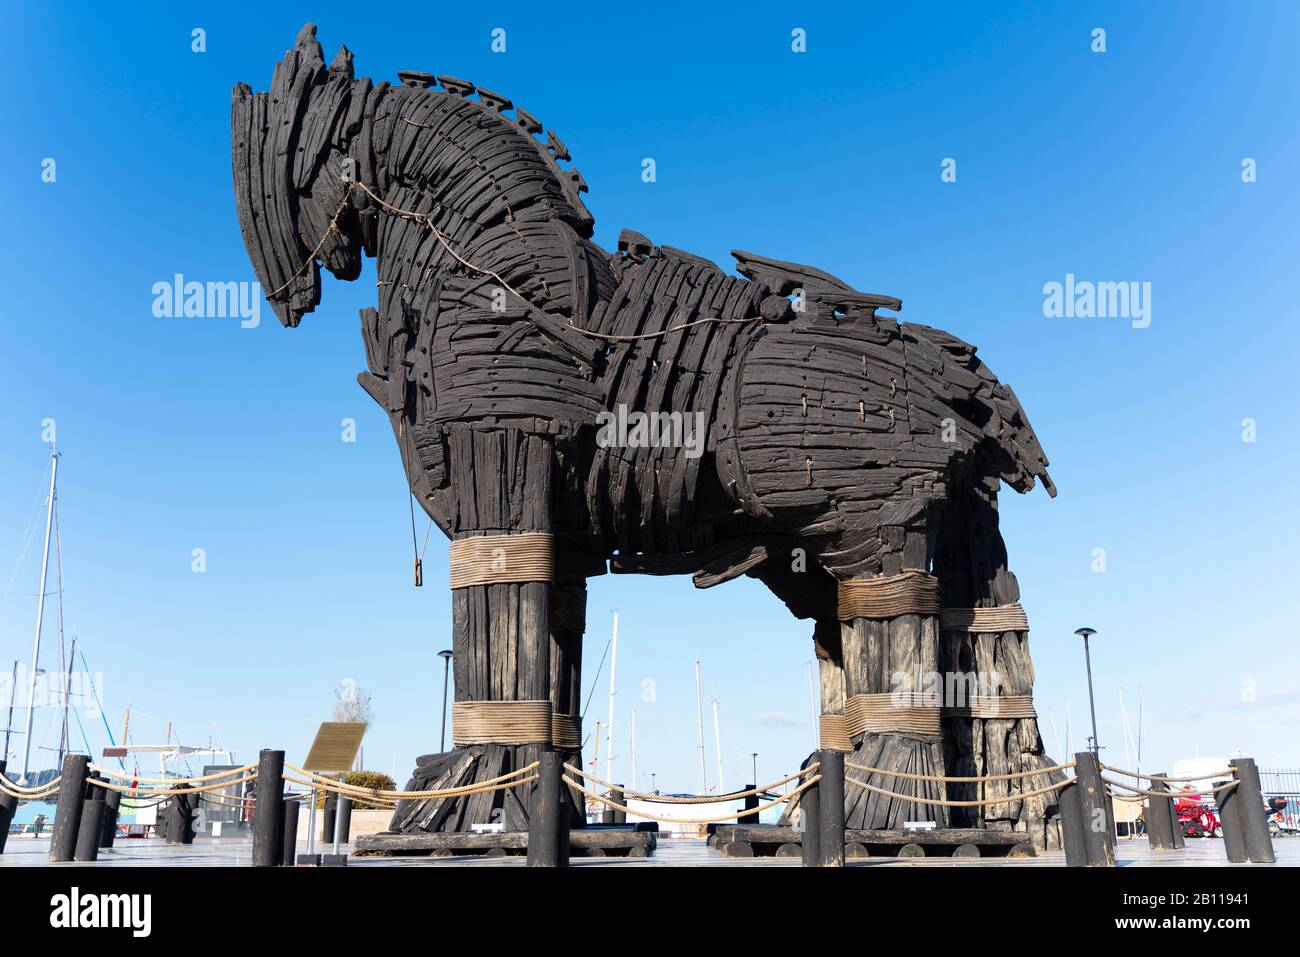 Troy horse in çanakkale. The wooden horse used at the movie of Troy. Stock Photo